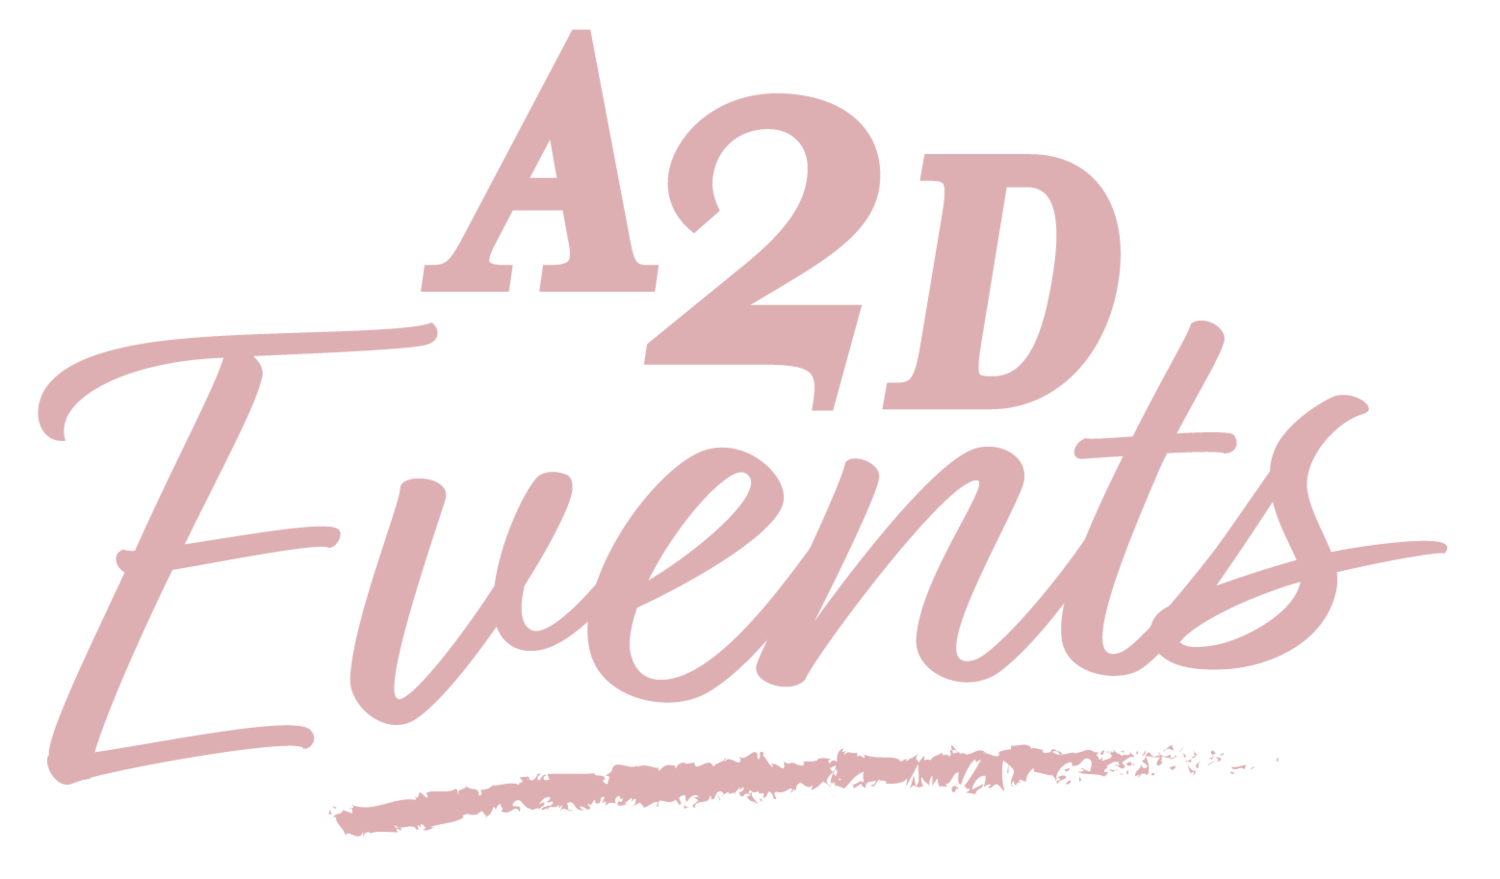 A2D Events